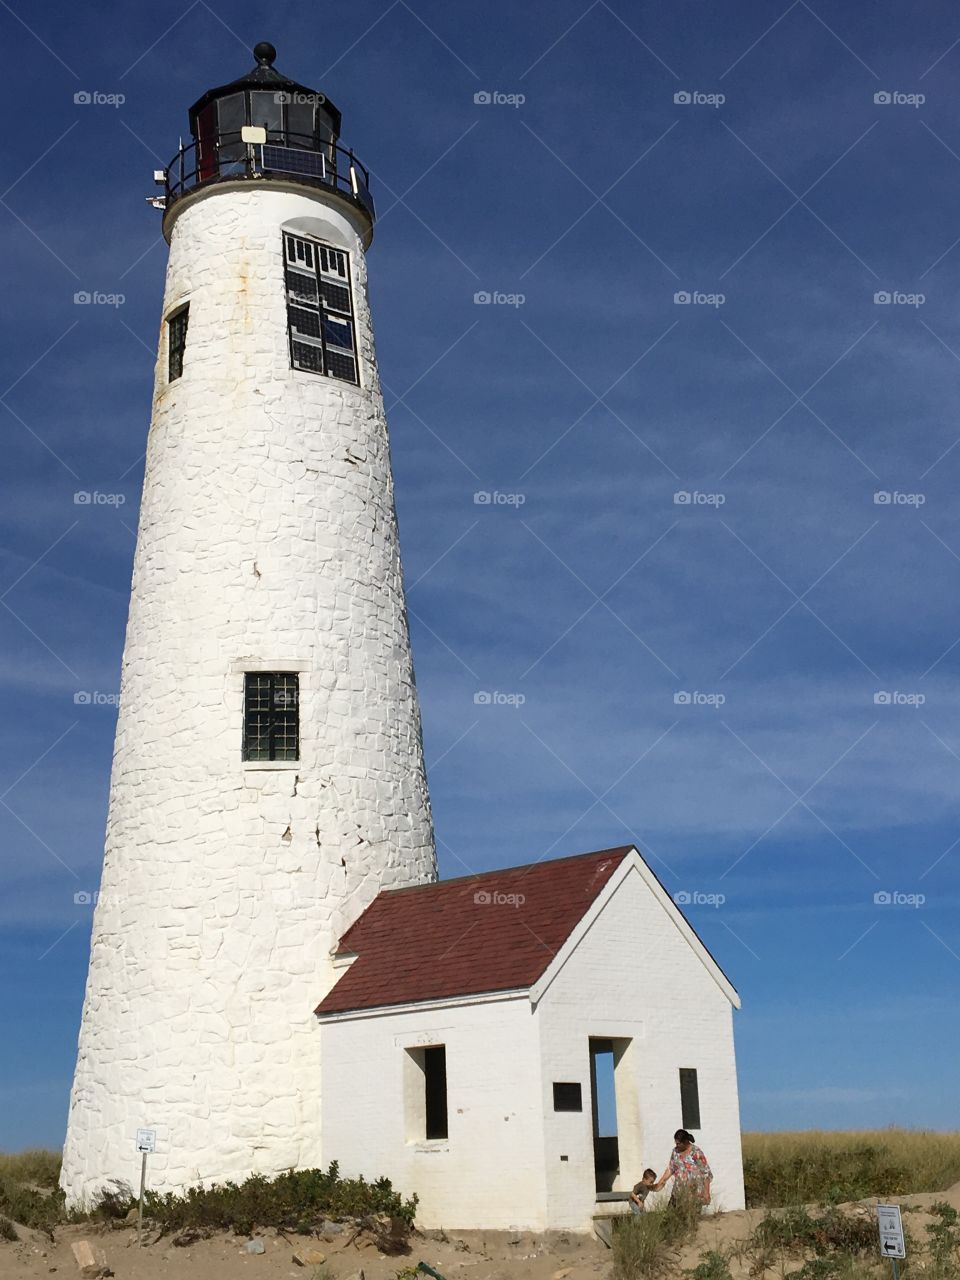 Great Point Lighthouse - Nantucket, MA